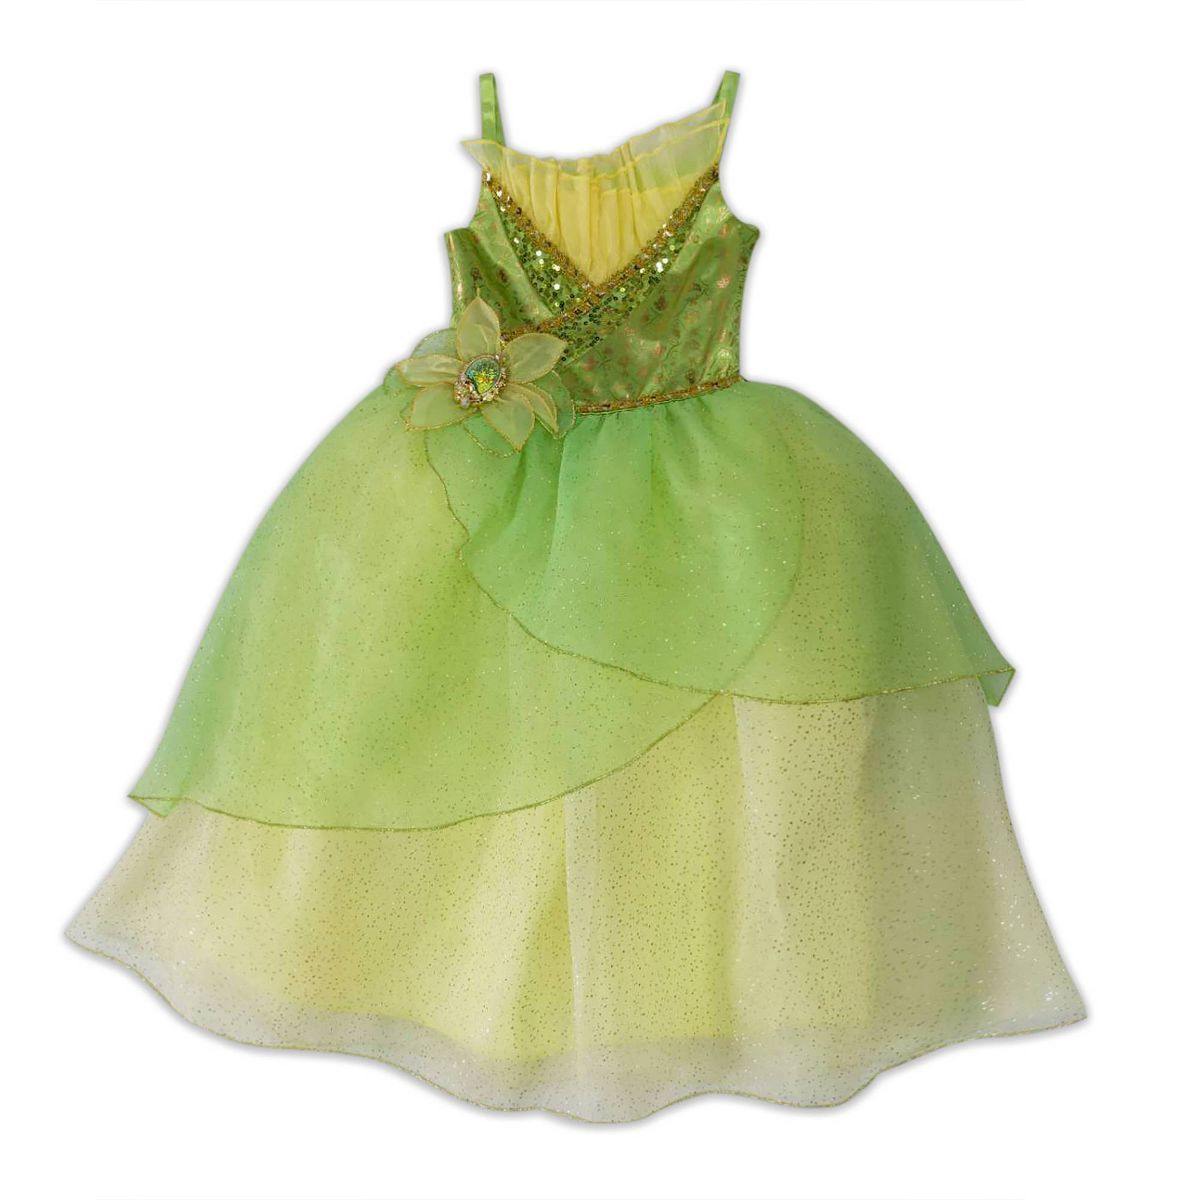 Shop all The Princess and the Frog | Target